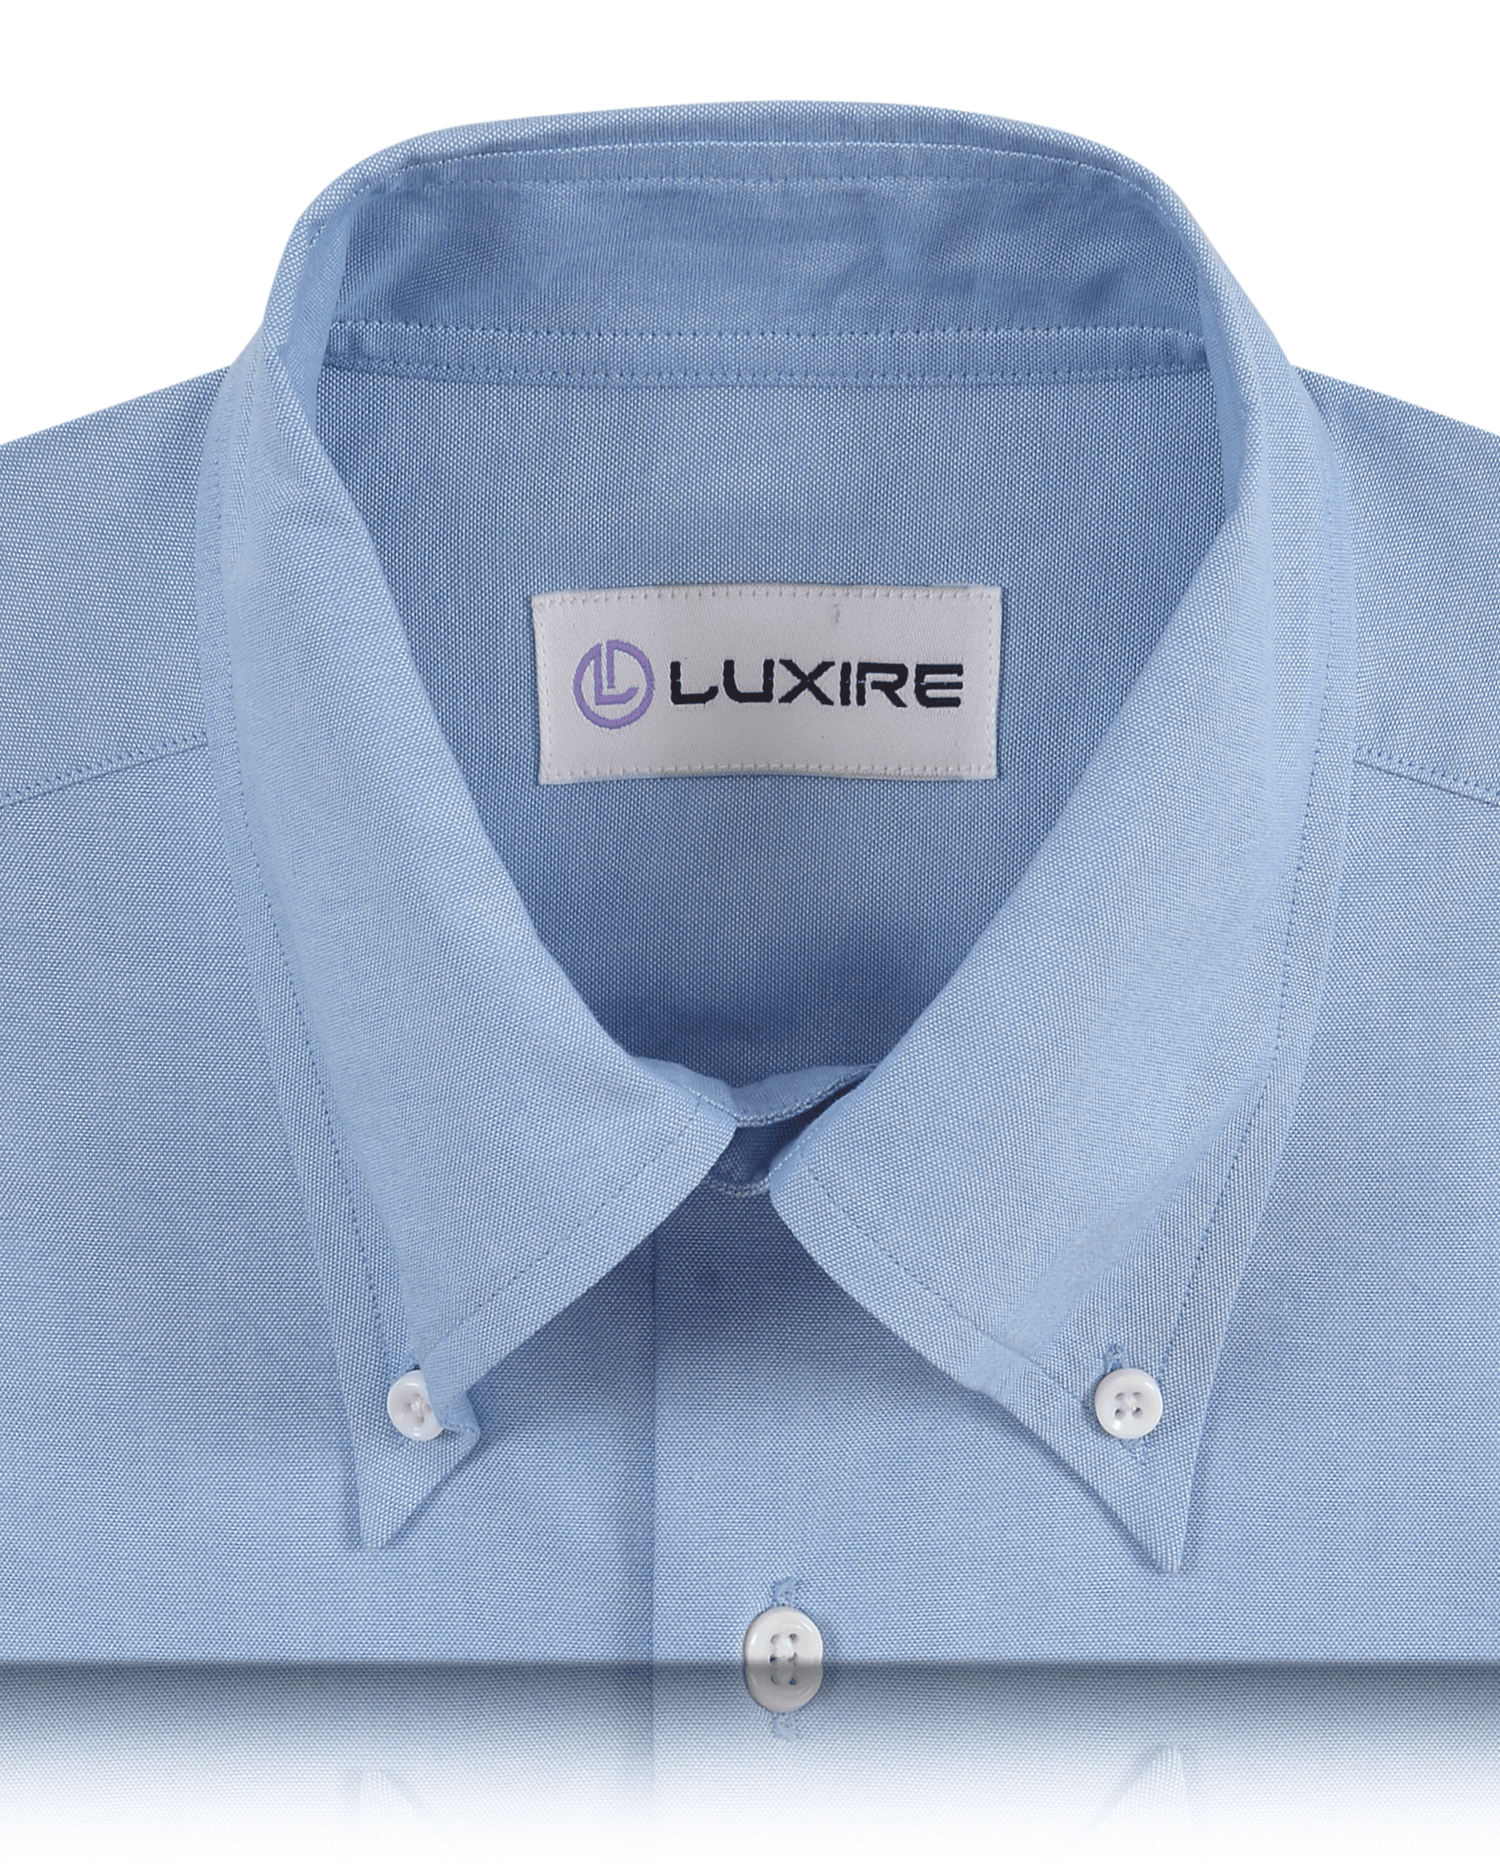 Collar of the custom oxford shirt for men by Luxire in classic blue summer